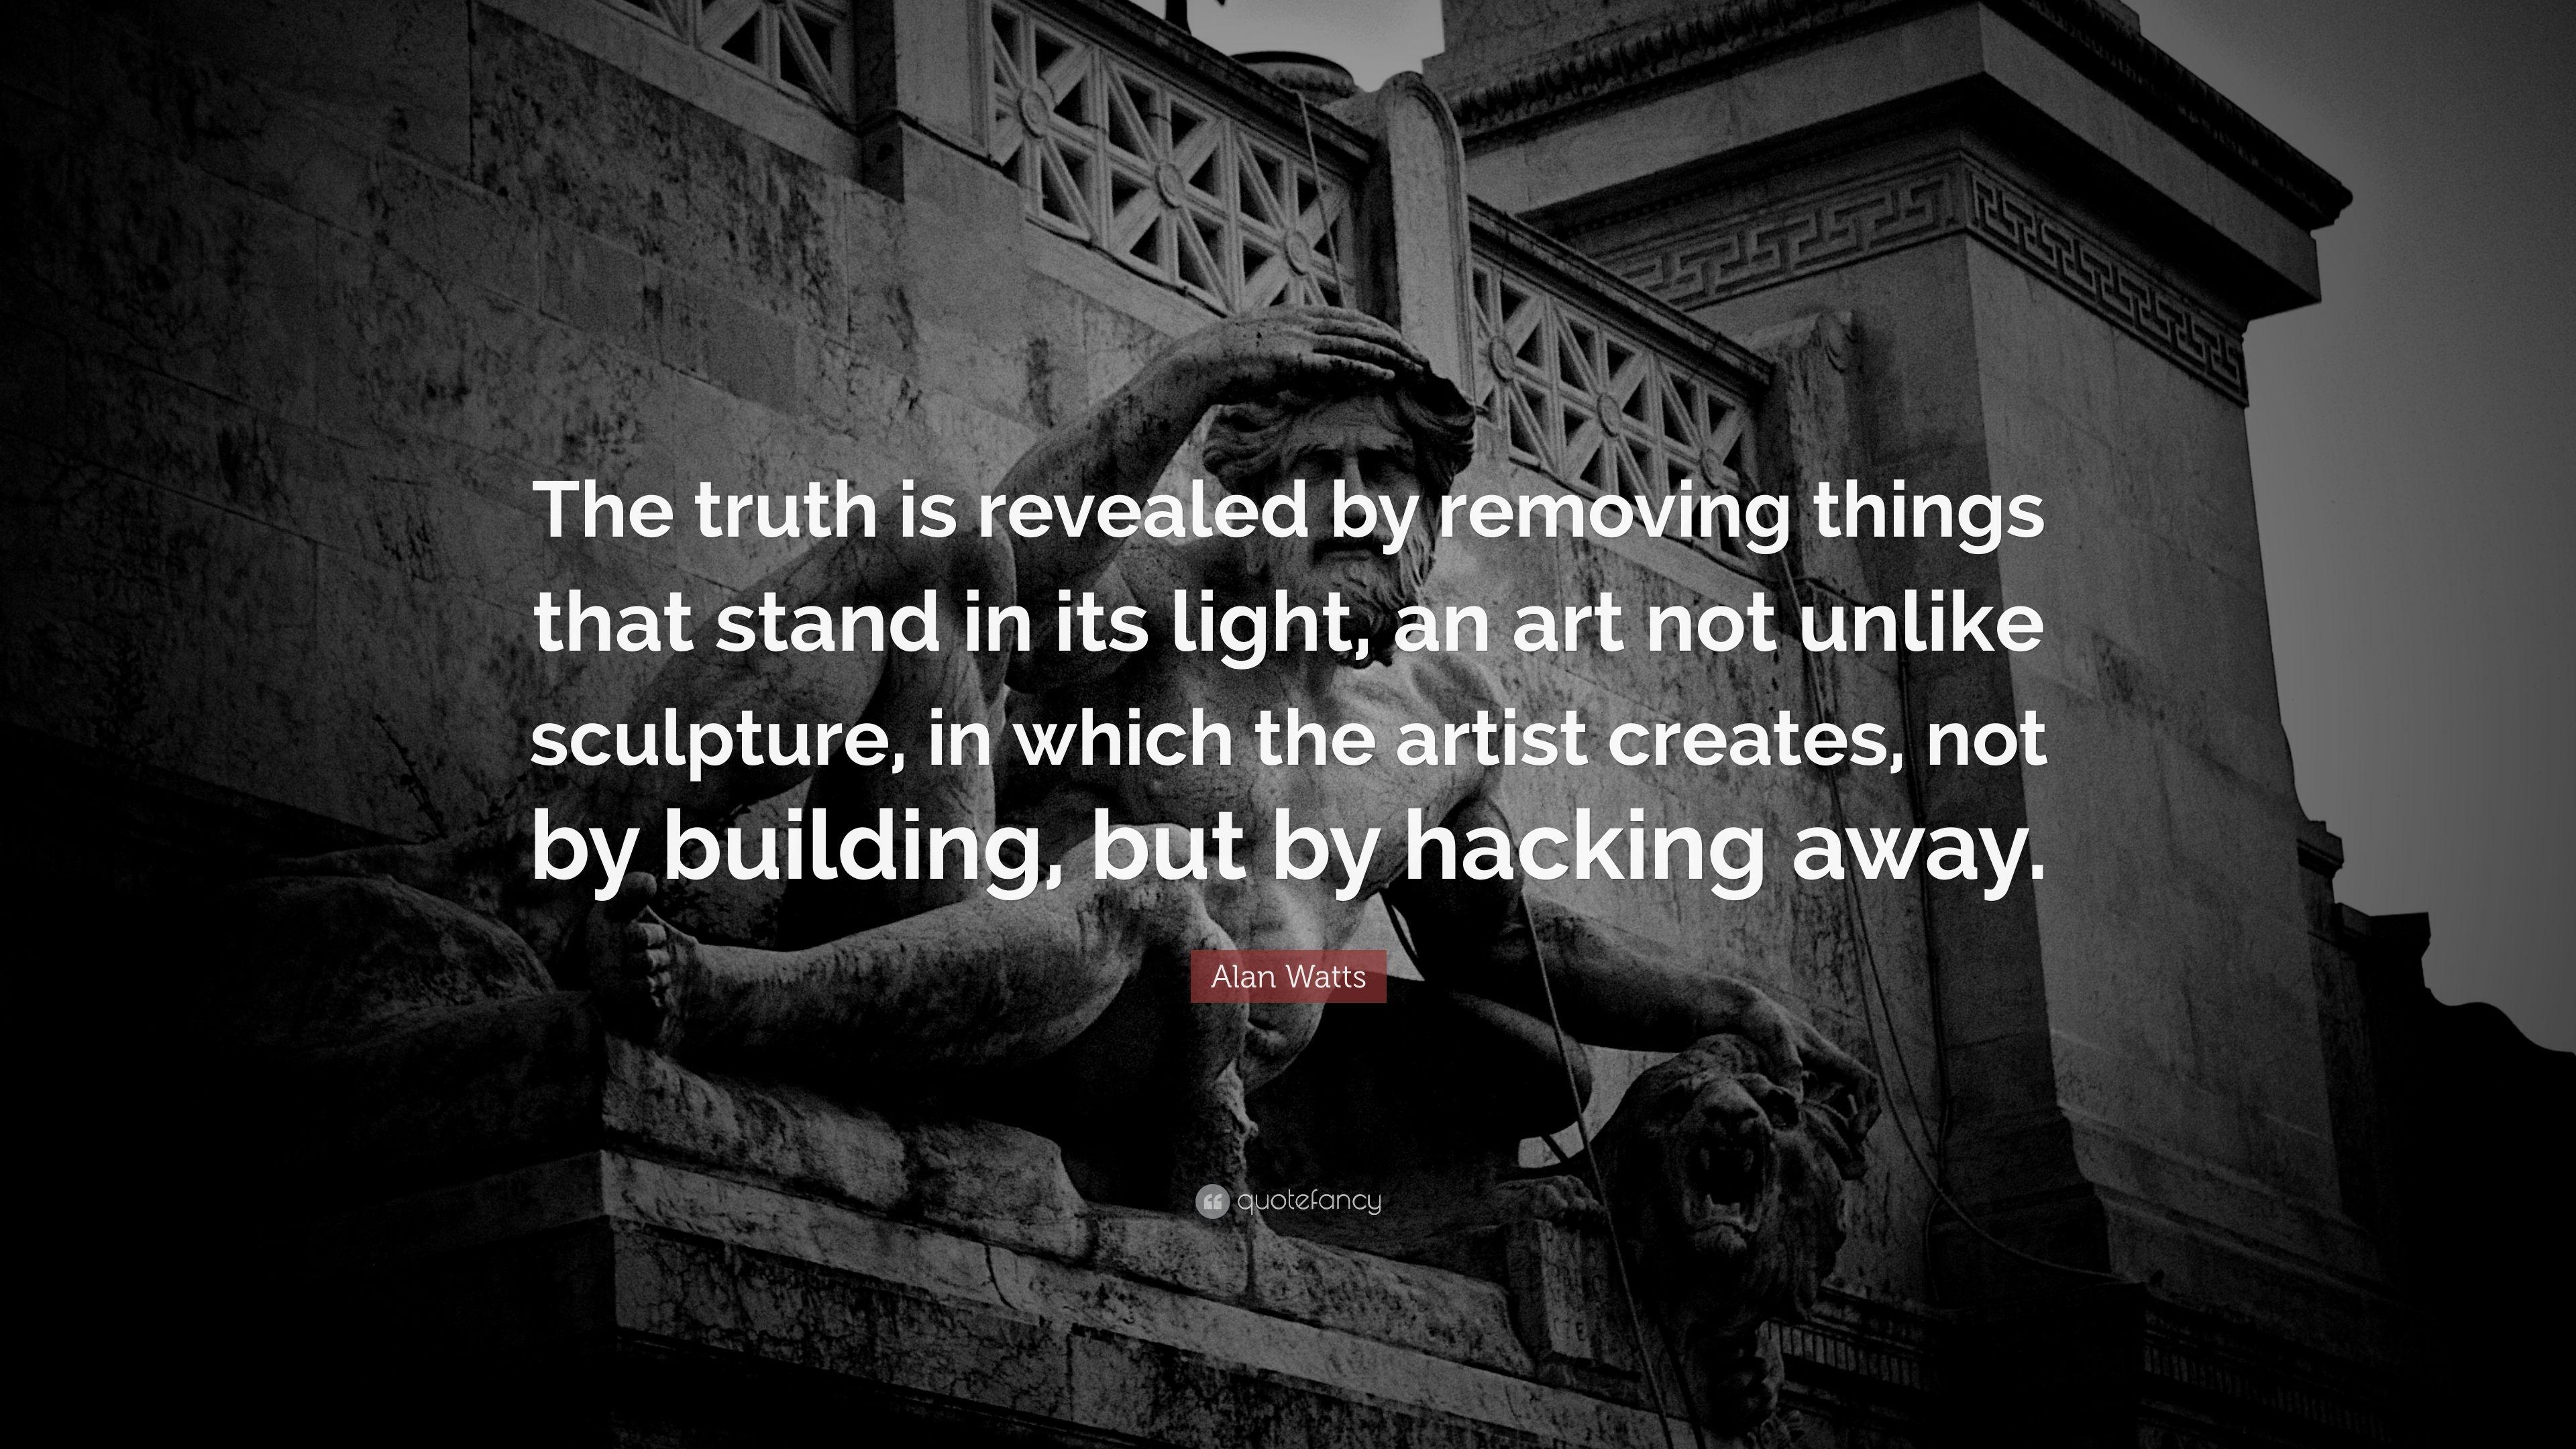 Alan Watts Quote: “The truth is revealed by removing things that